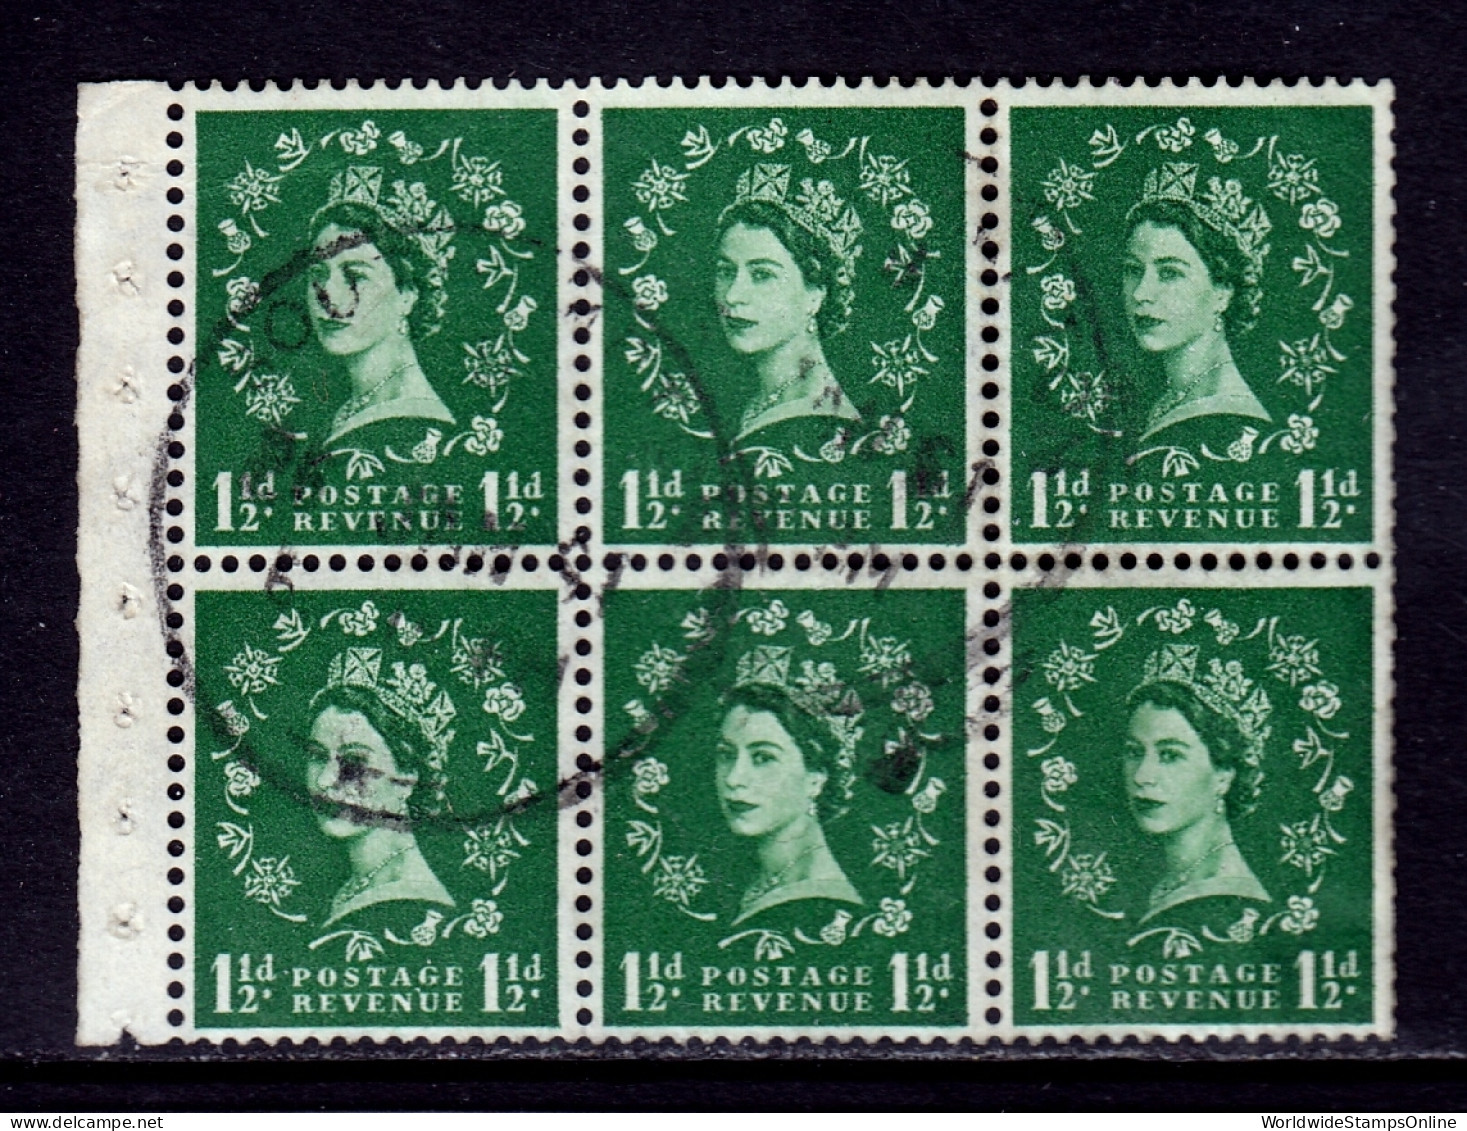 Great Britain - SG #572Wi - Used - Inverted Wmk., Full Booklet Pane - SG £7.50+ - Gebraucht